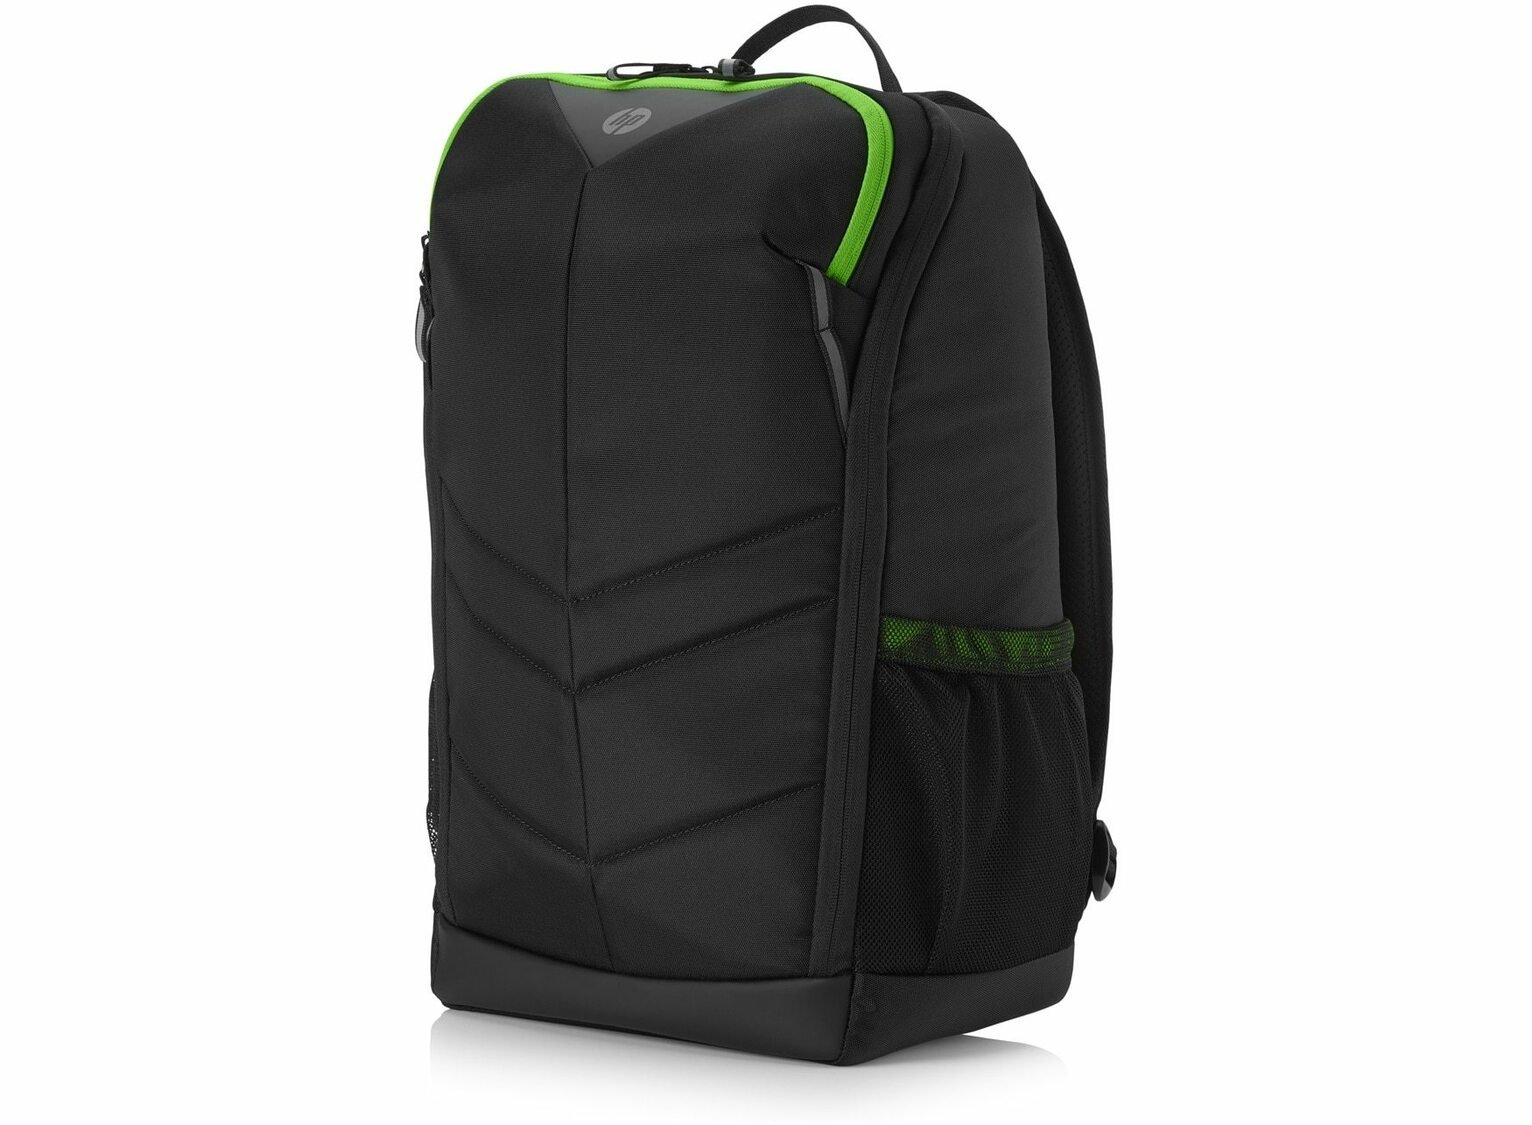 HP Pavilion 400 15.6 Inch Gaming Laptop Backpack Review